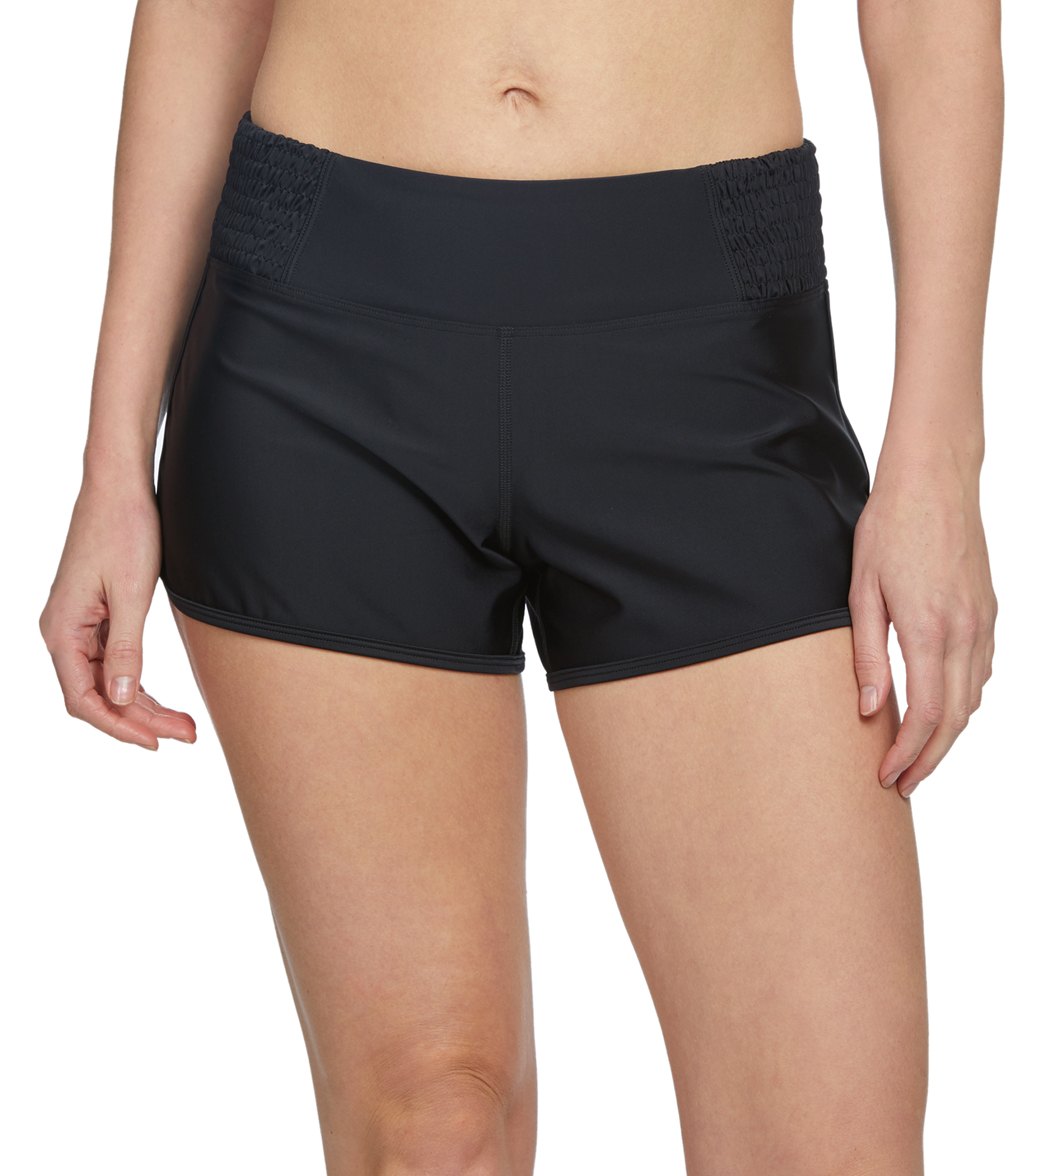 Prana Solid Chantel Cover Up Short at SwimOutlet.com - Free Shipping